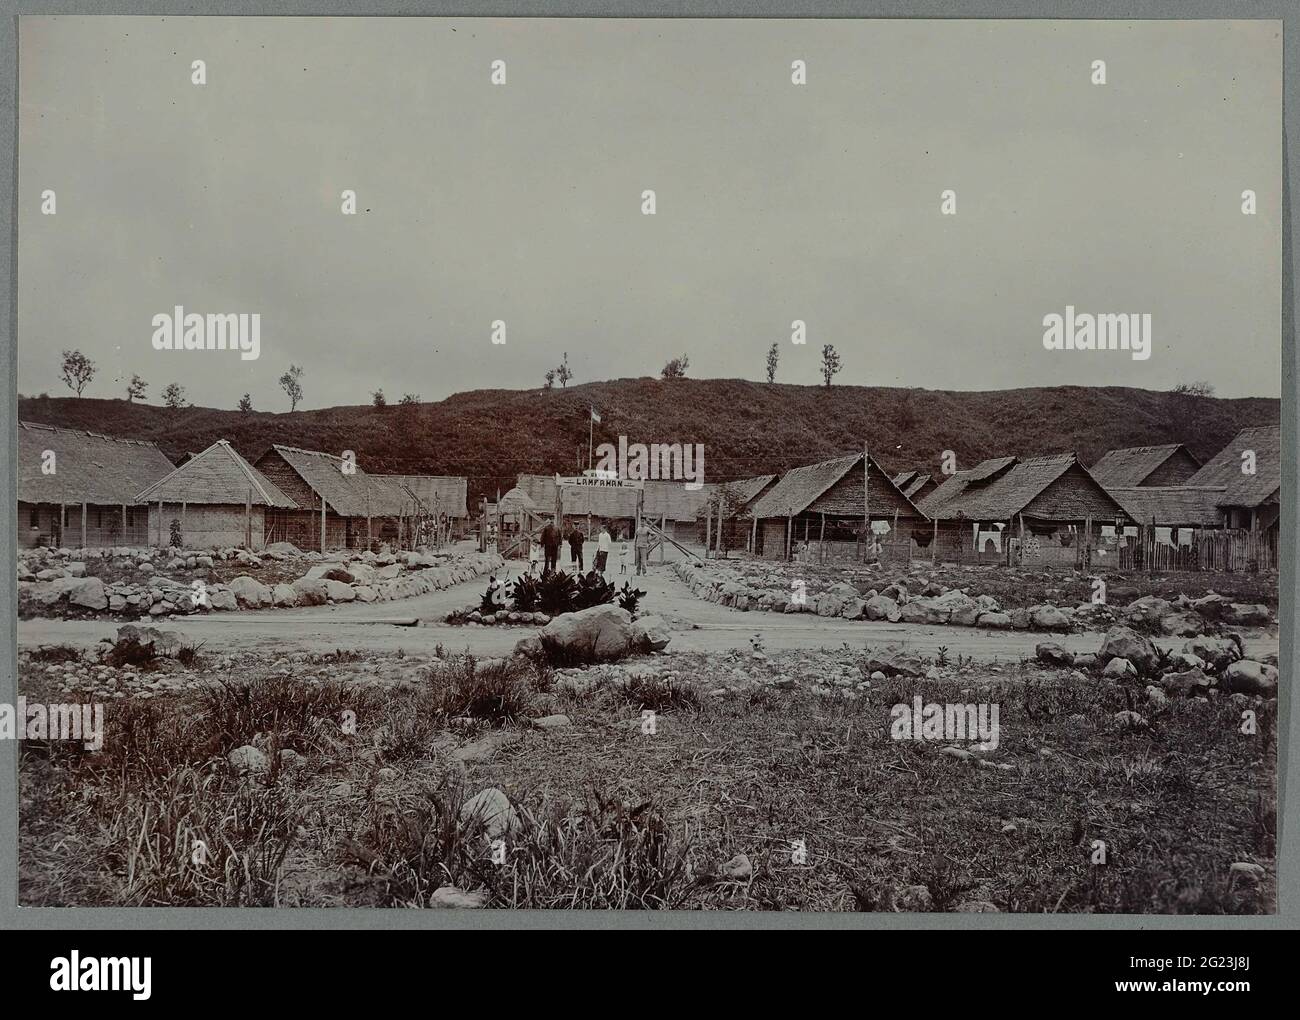 Bivouac Lampahan. View of the Bivouac Lampahan, for the gate a few soldiers and a woman and two children. Stacked photo in an album with 107 photos about the construction of the Gajoegweg on North Sumatra between Bireuen and Takenuen between 1903-1914. Stock Photo